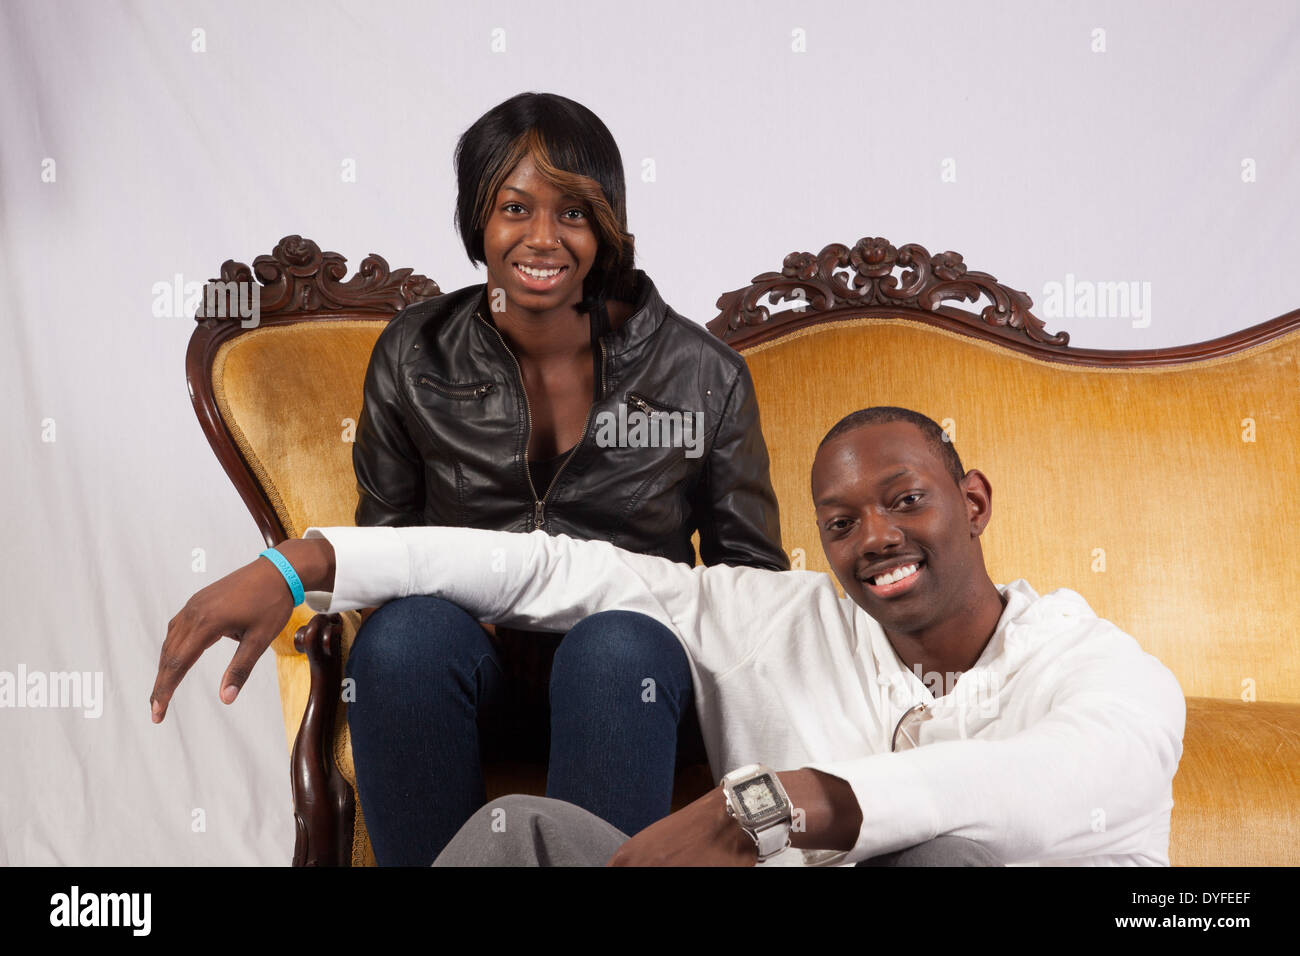 Black man and woman sitting together in a romantic mood, looking at the camera with a smile Stock Photo